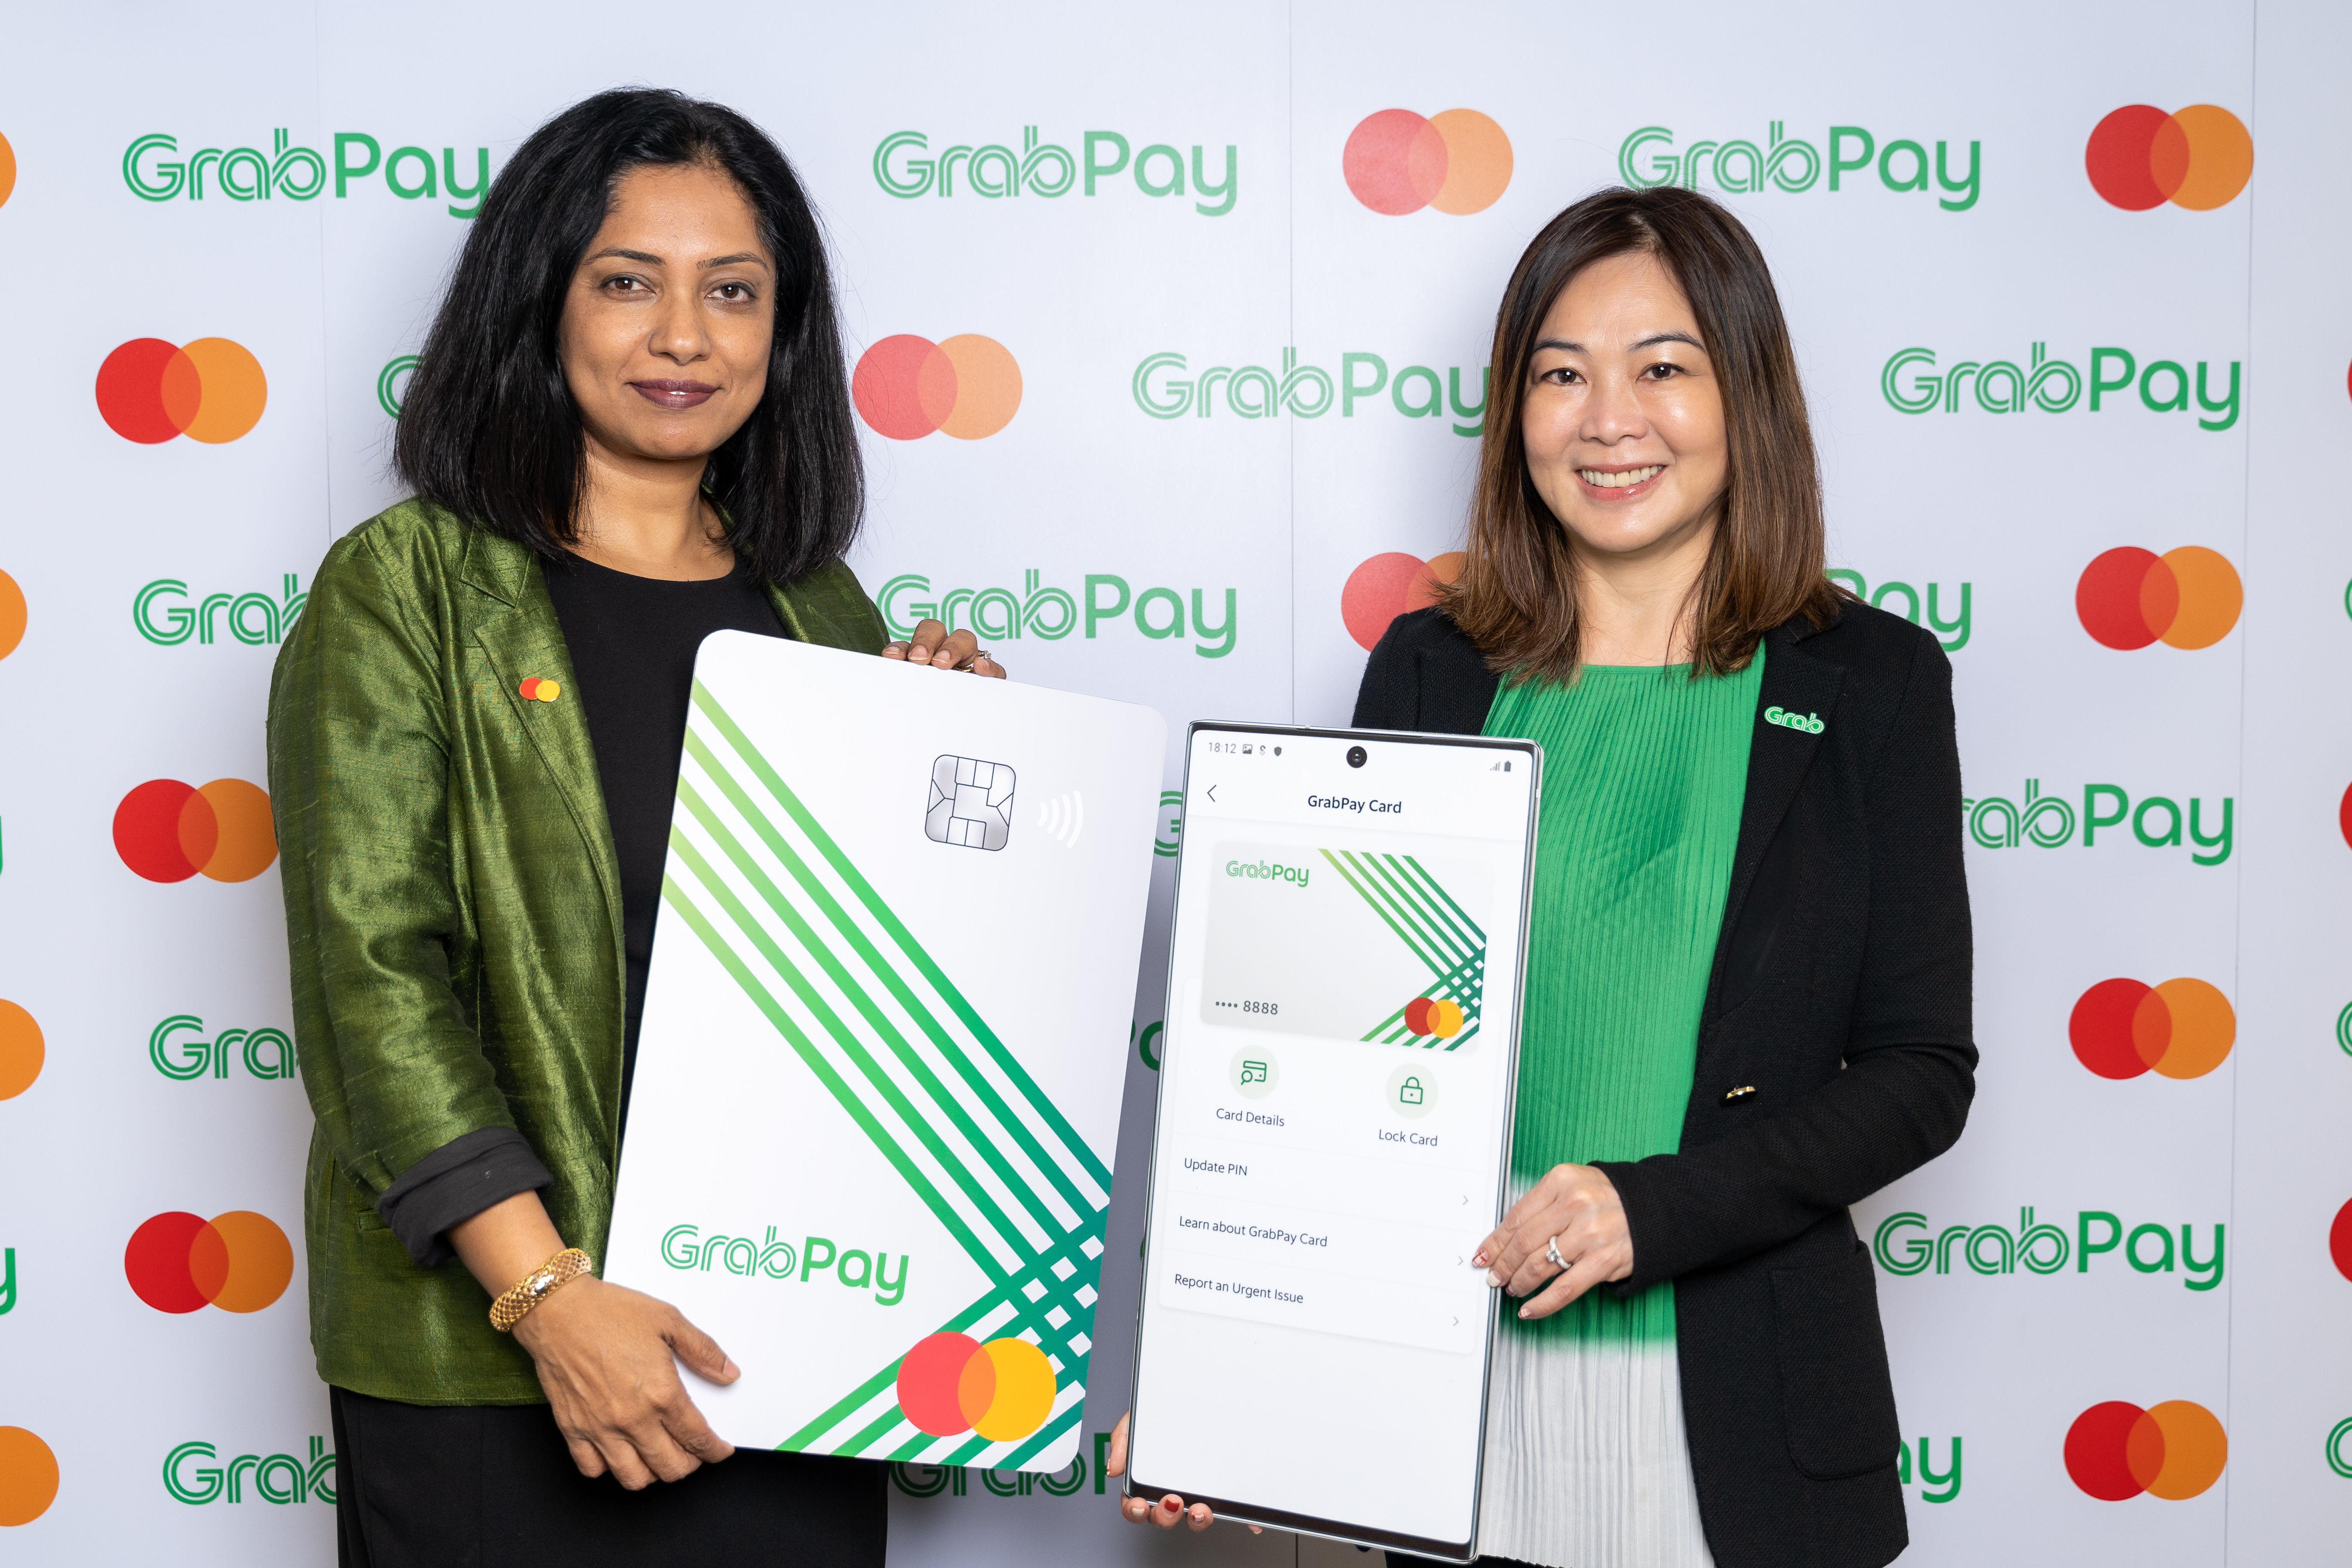 (L-R: Rama Sridhar, Executive Vice President, Digital & Emerging Partnerships and New Payment Flows, Asia Pacific, Mastercard and Huey Tyng Ooi, GrabPay Managing Director pose with mockups of the GrabPay Card)